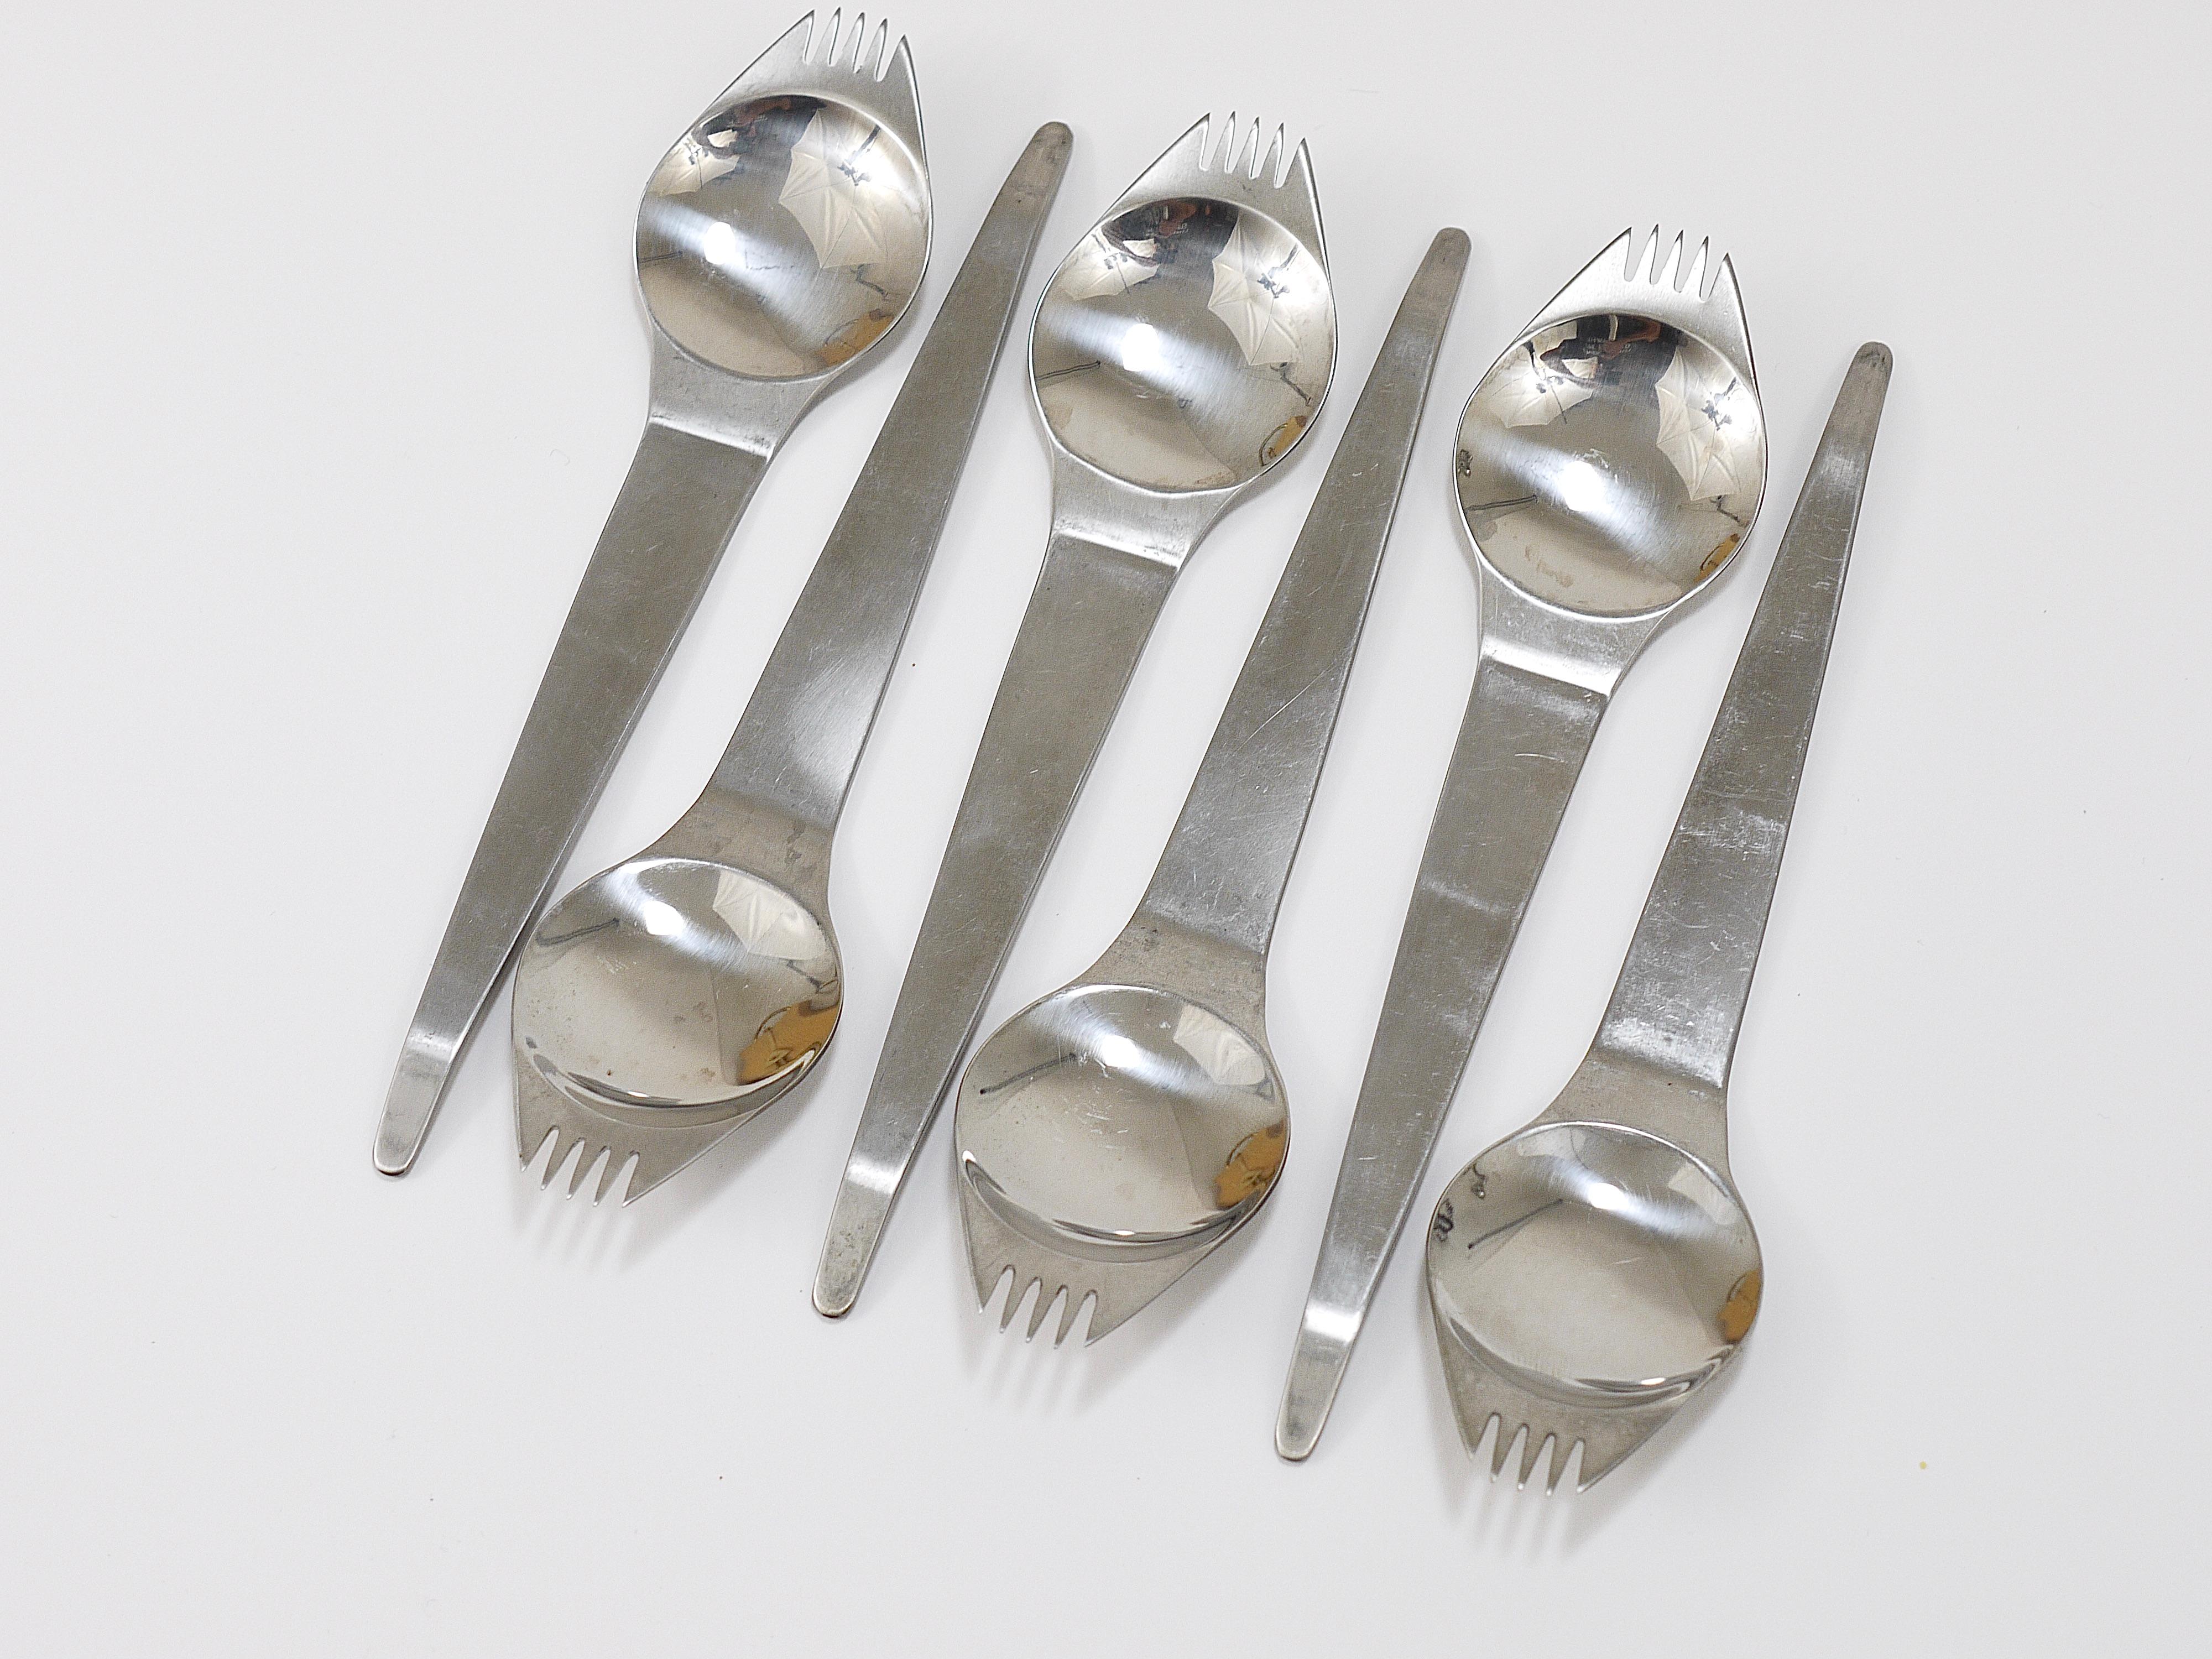 Up to 7 identical party sporks (a smart combination of a spoon and a fork) from the 1960s. Model „Göffel“, award-winning design by Ernst Otto Loewe and K.H. Hoelscher, executed by Amboss Austria. High-quality cutlery, made of polished and brushed